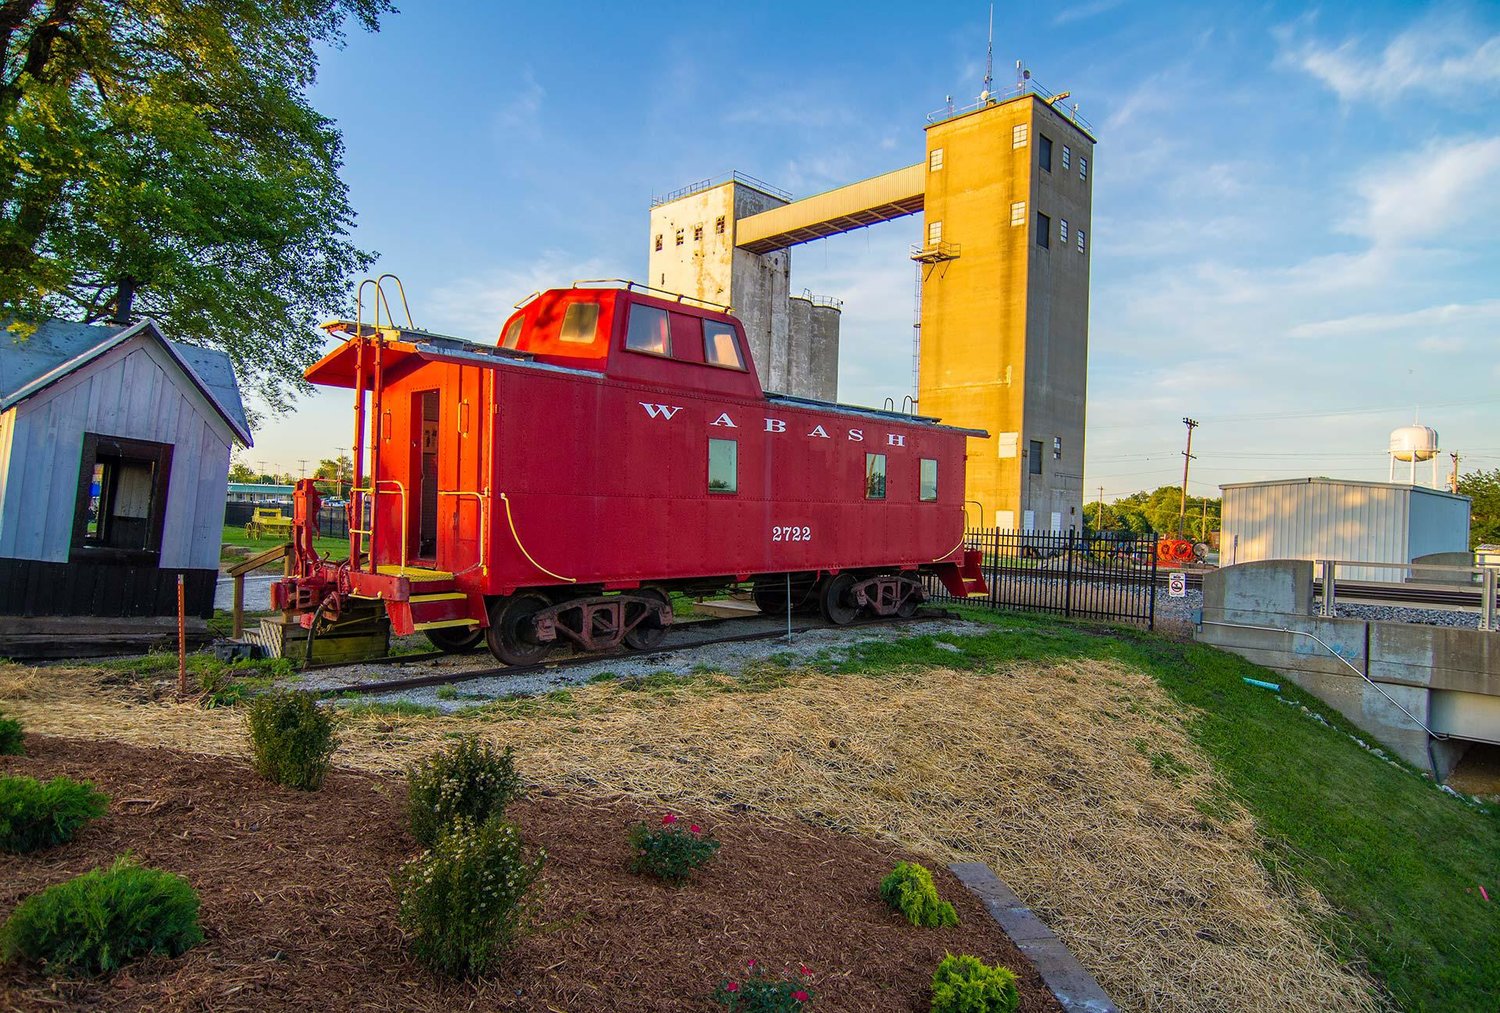 The late Lloyd E. Deierling of Moberly will be recognized Saturday for his contribution to preserving rail history in Moberly.